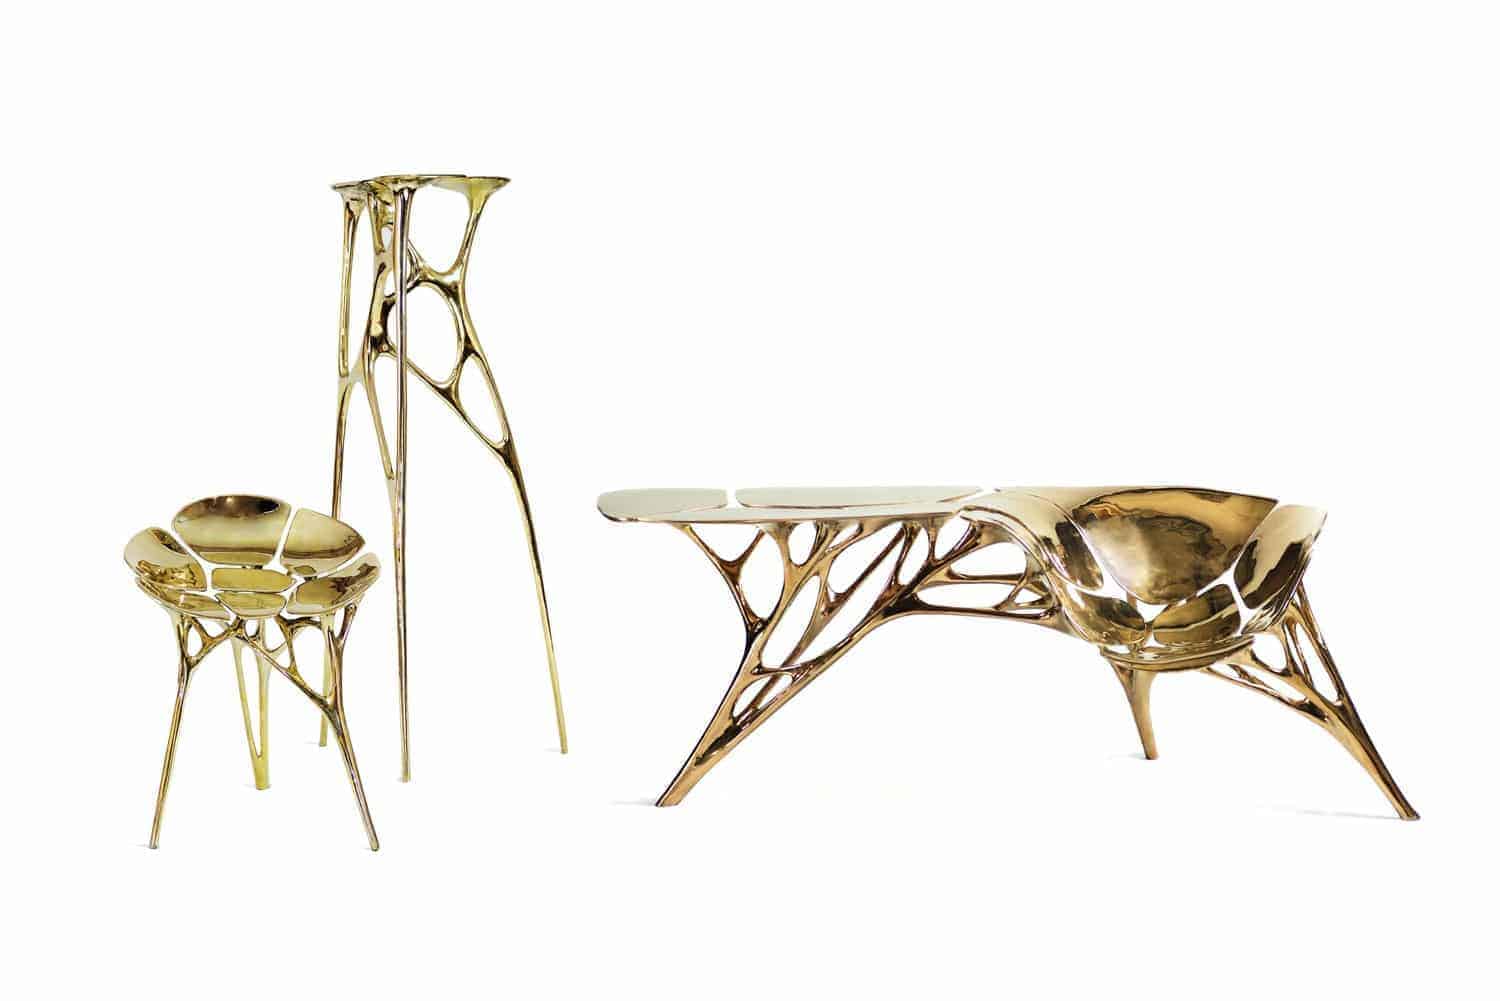 Links: Lotus Stool (2015) Midden: Lotus High Side Table (2015) Rechts: Lotus Console Table (2016)